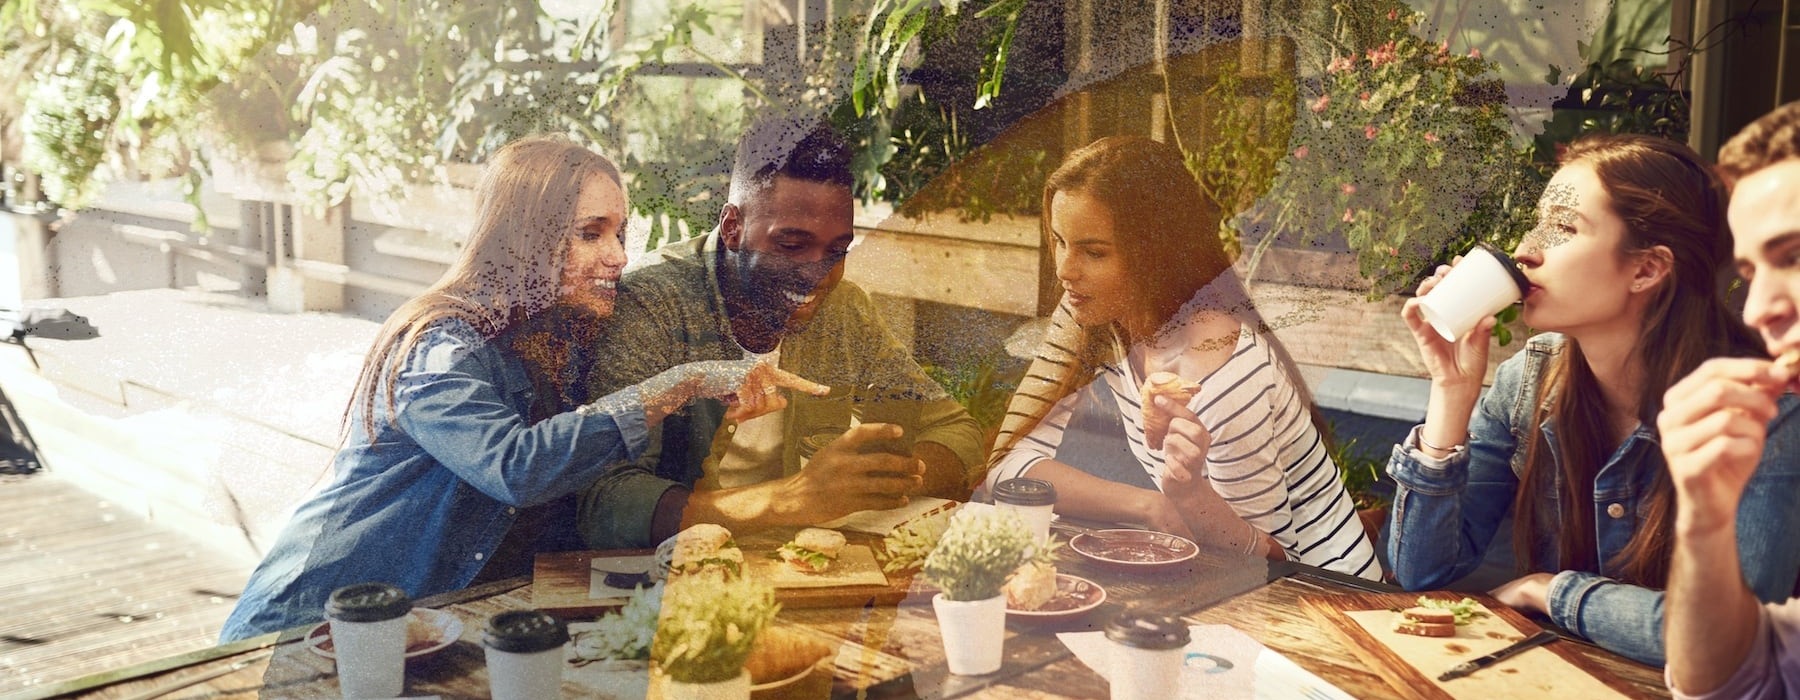 lifestyle image of people laughing outdoors at a table